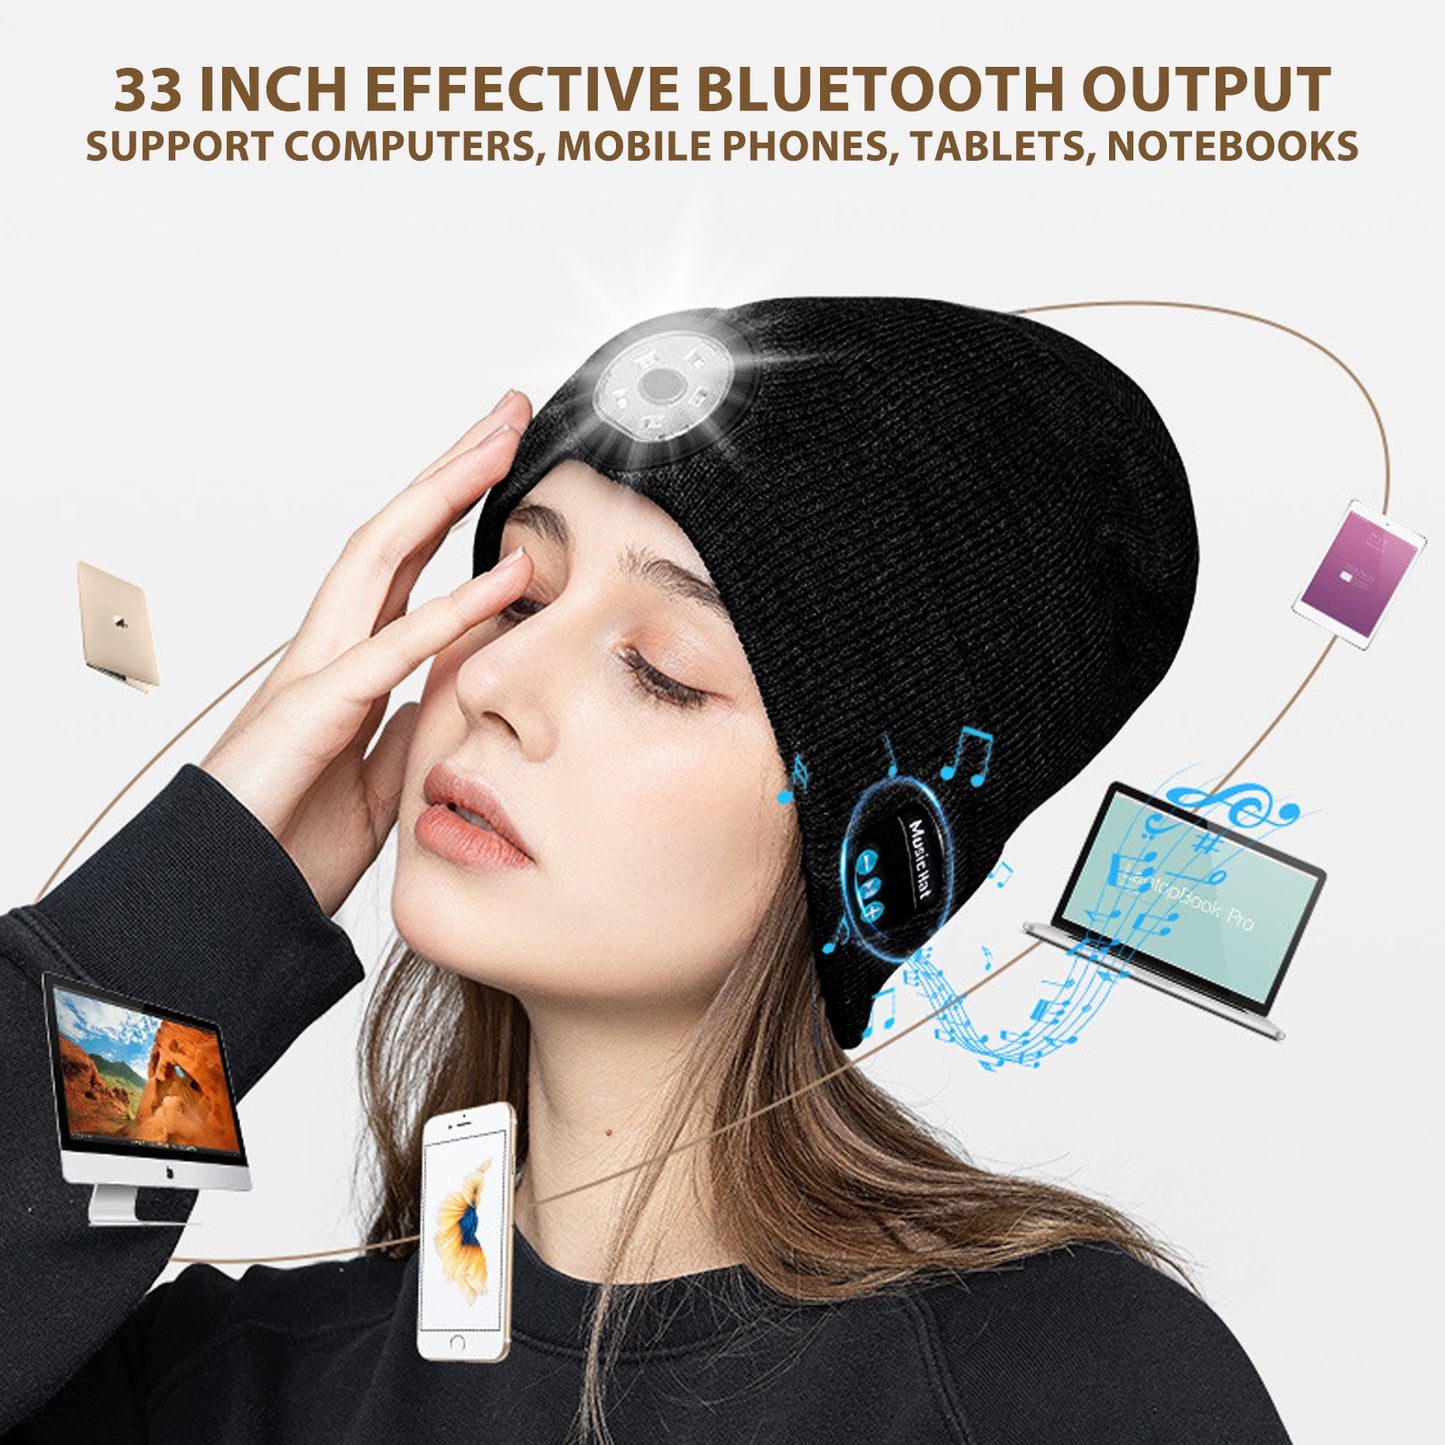 Music Beanie Hat with Flashlight for Men Women, Winter Warm Knitted Beanie Bluetooth Wireless Hat for Outdoor Skiing Running